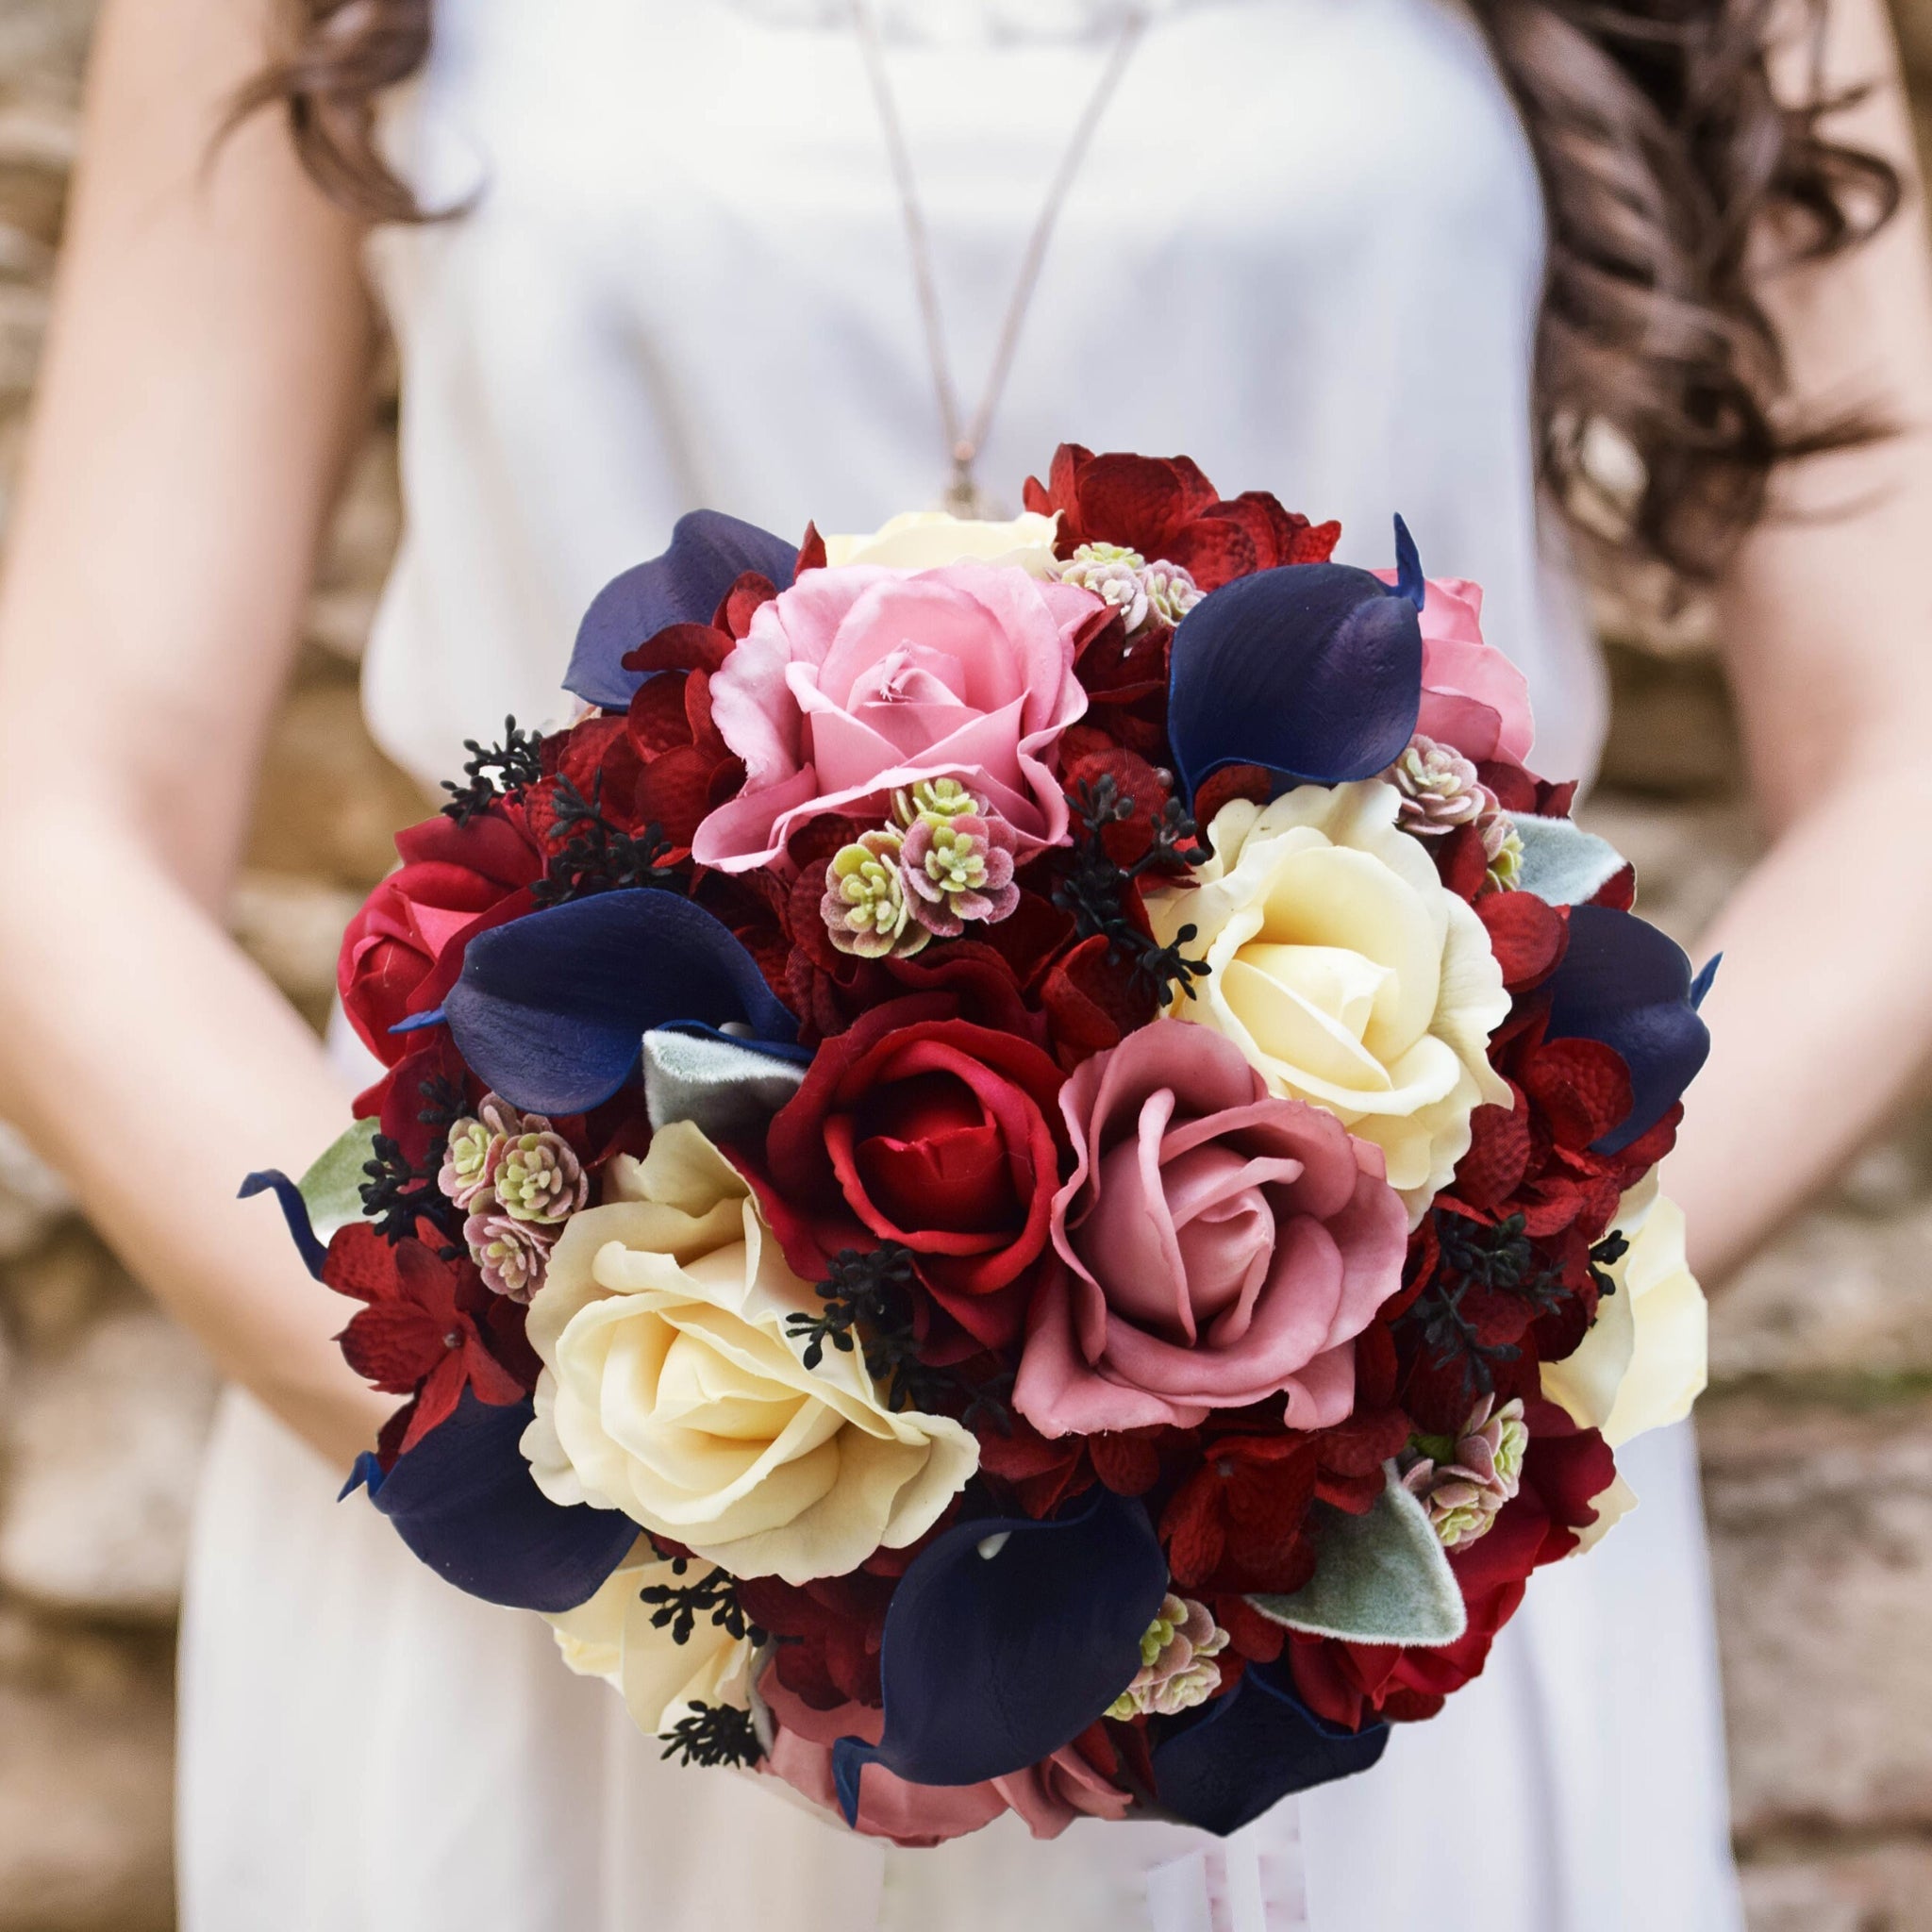 Fall Wedding Bridal or Bridesmaid Bouquet Mauve Burgundy Navy Red - Succulents Calla Lilies Roses - add Groom Groomsmen Boutonnieres & More!